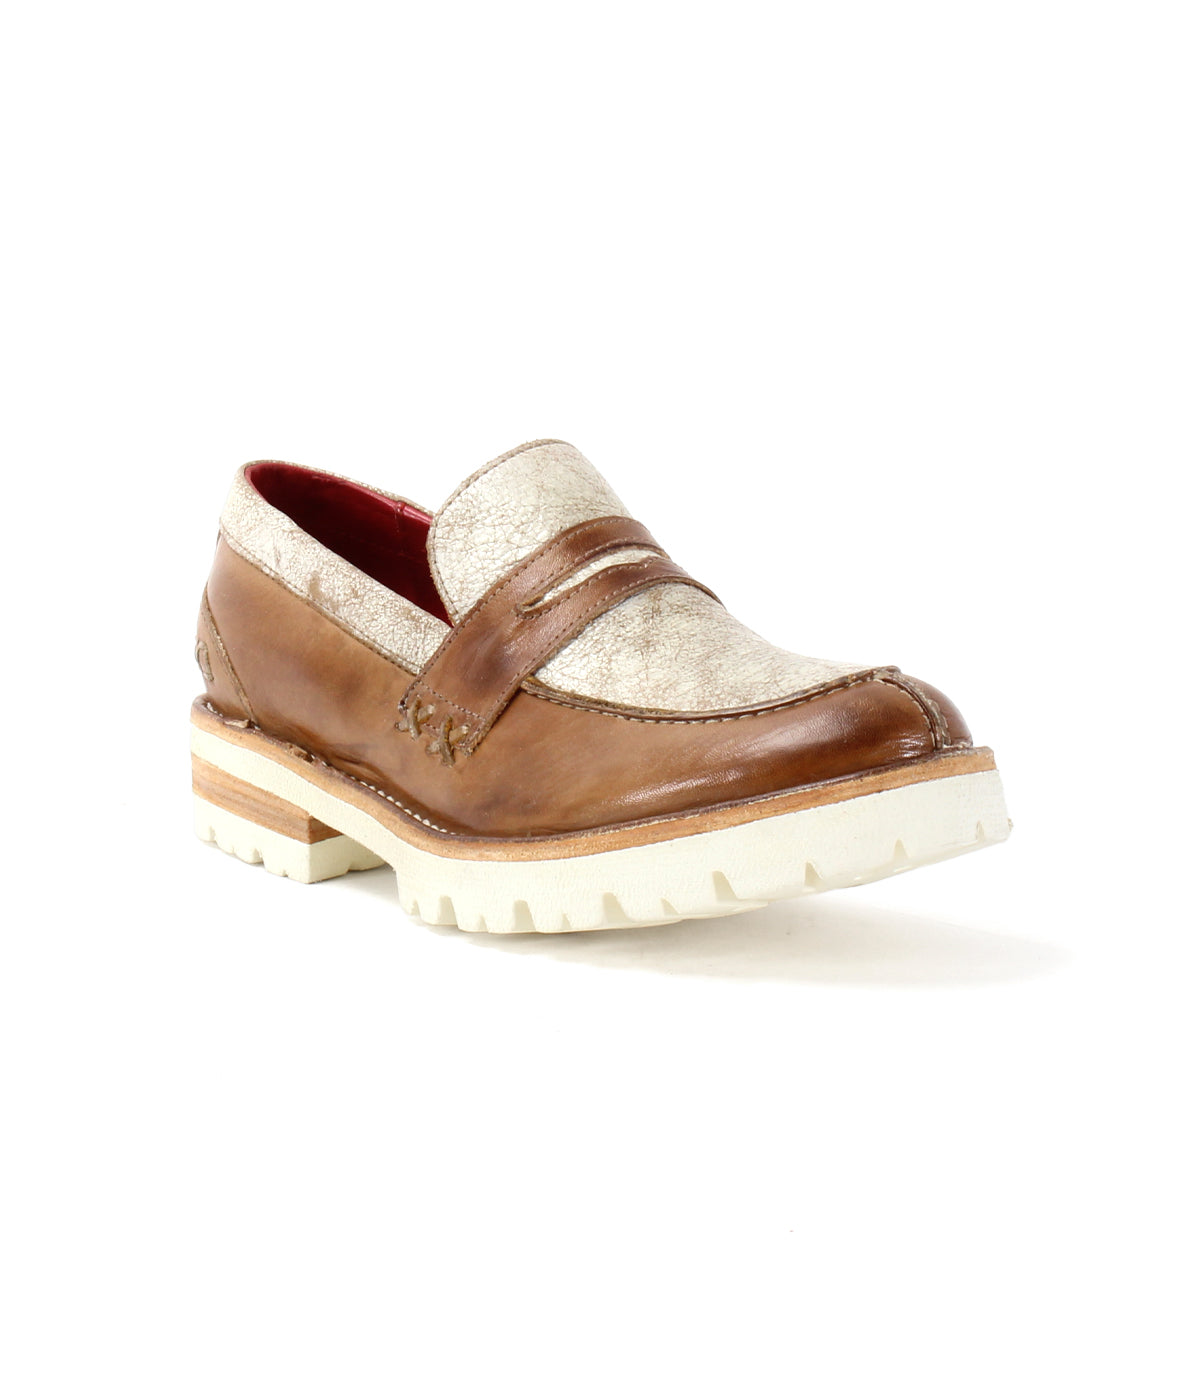 The Bed Stu men's brown leather penny loafer, the Reina III, features all-day comfort and a white sole.